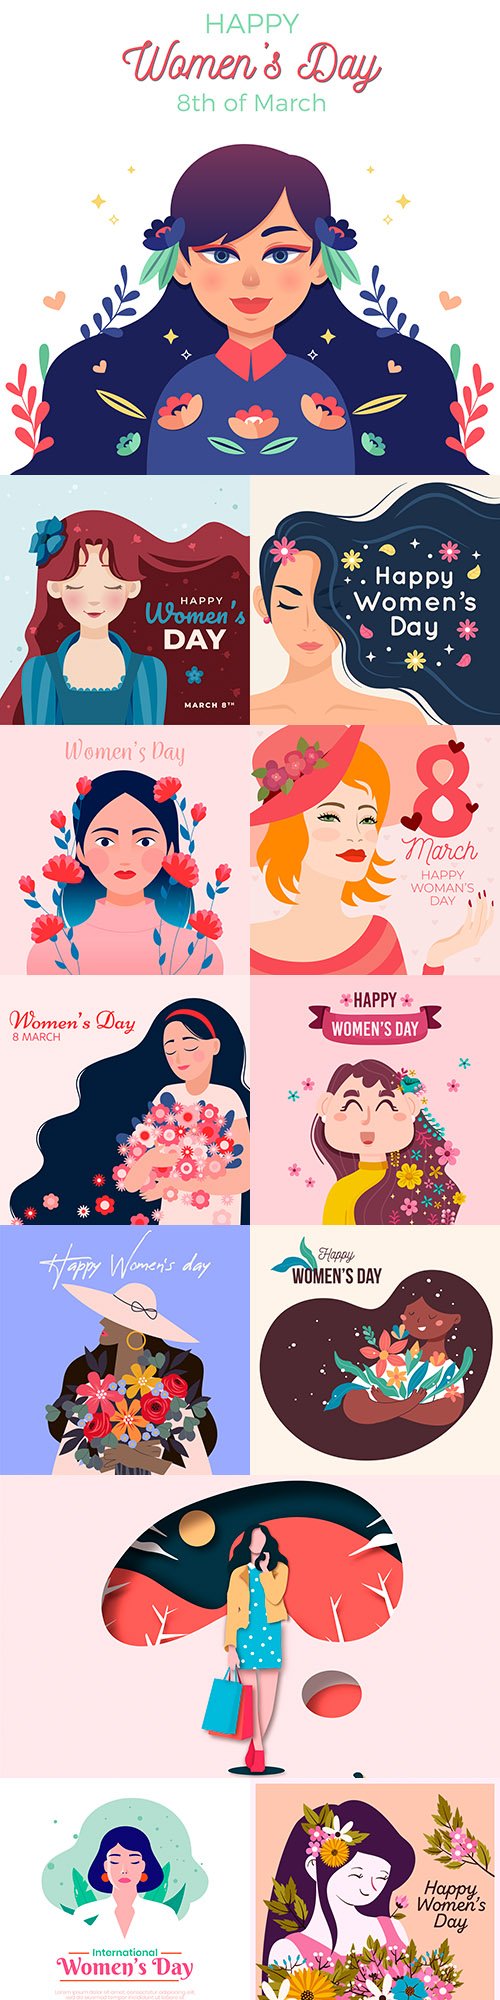 March 8 and Women's Day illustration flat design 6